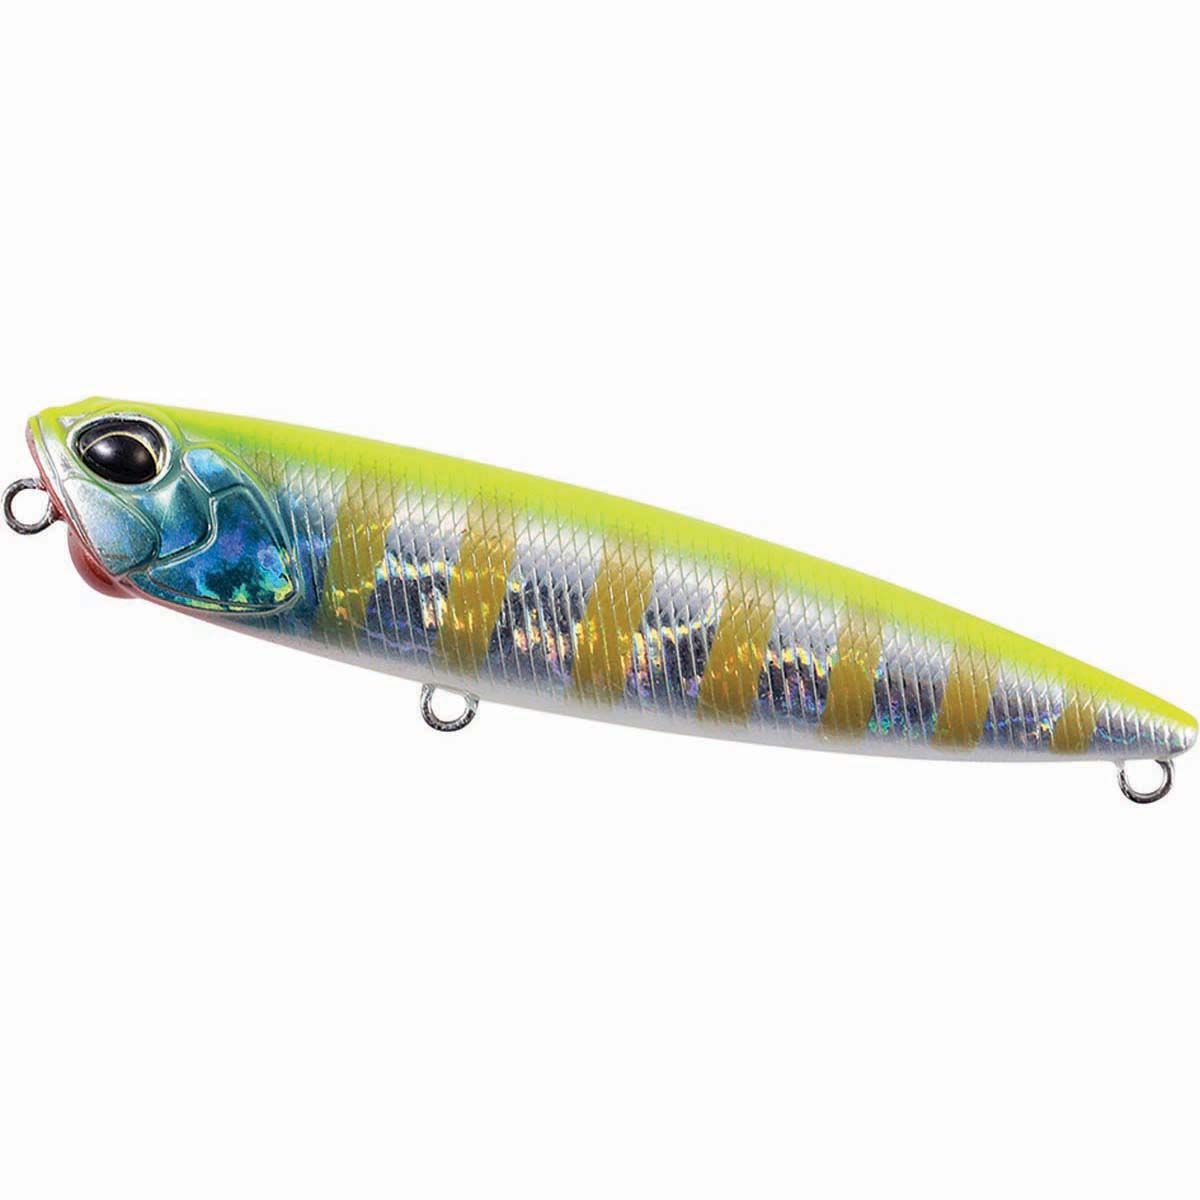 Duo Realis Pencil 6.5cm Lure Funky Gill